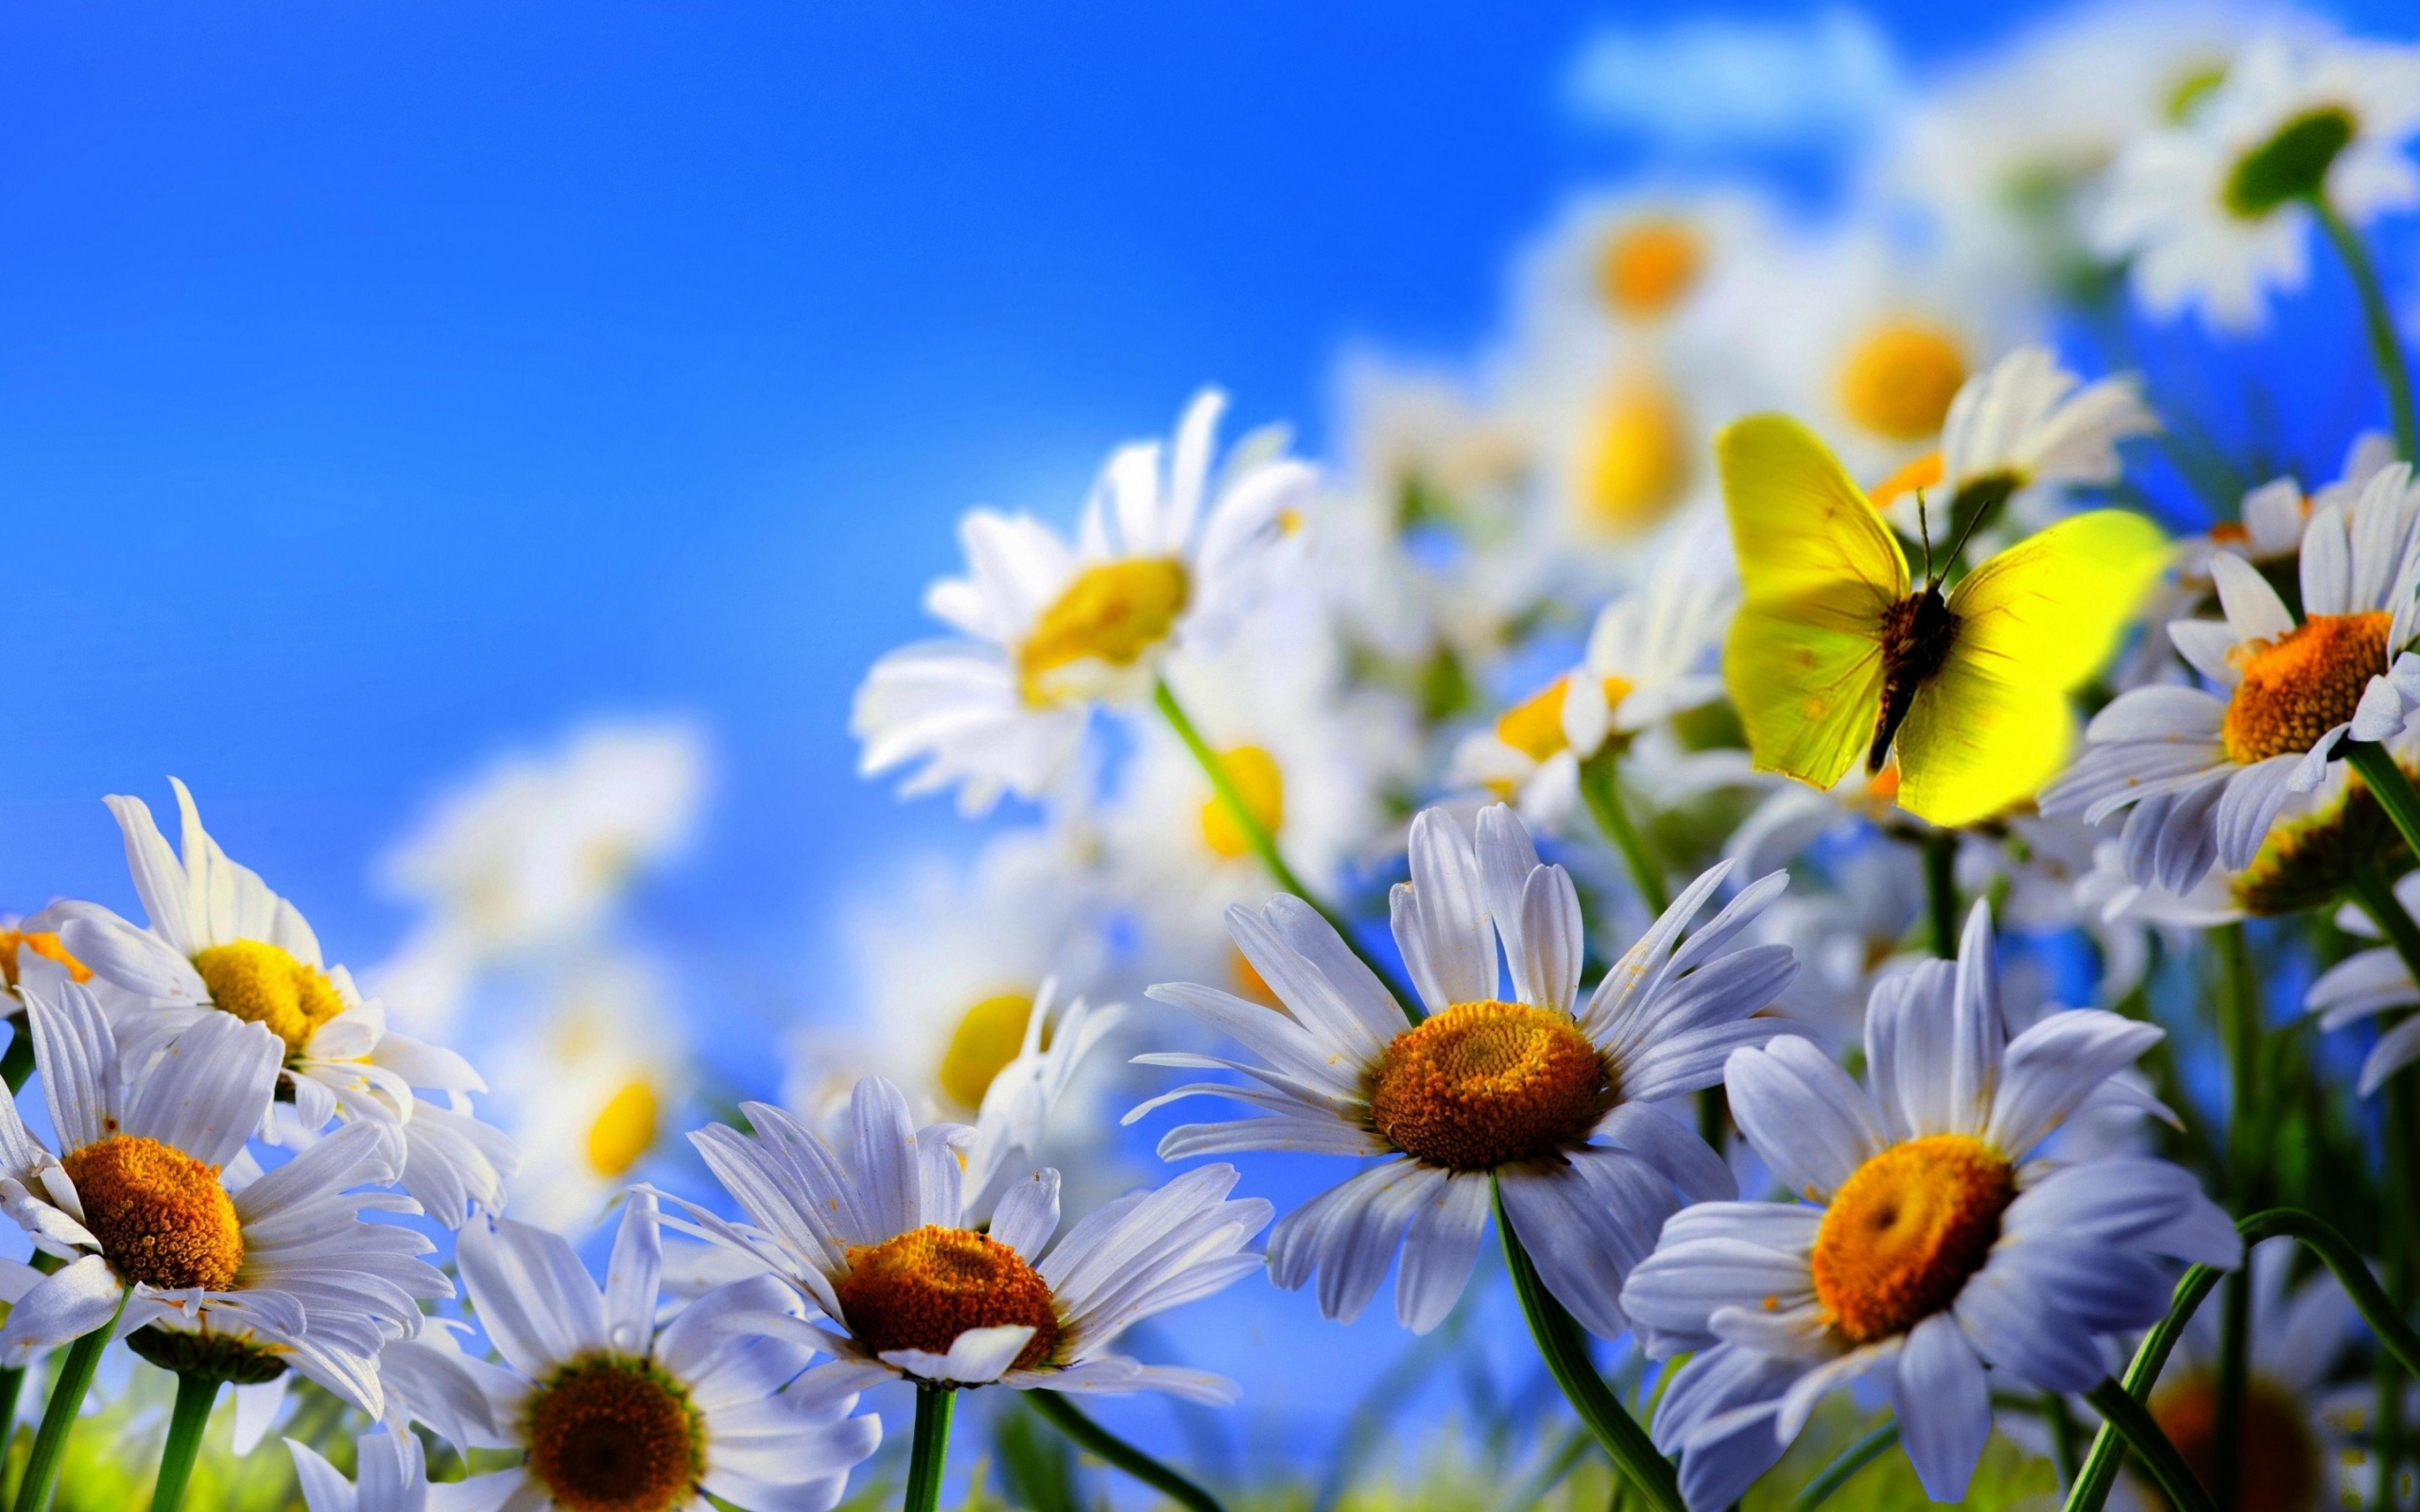 butterflies, plants, flowers, insects, camomile, blue